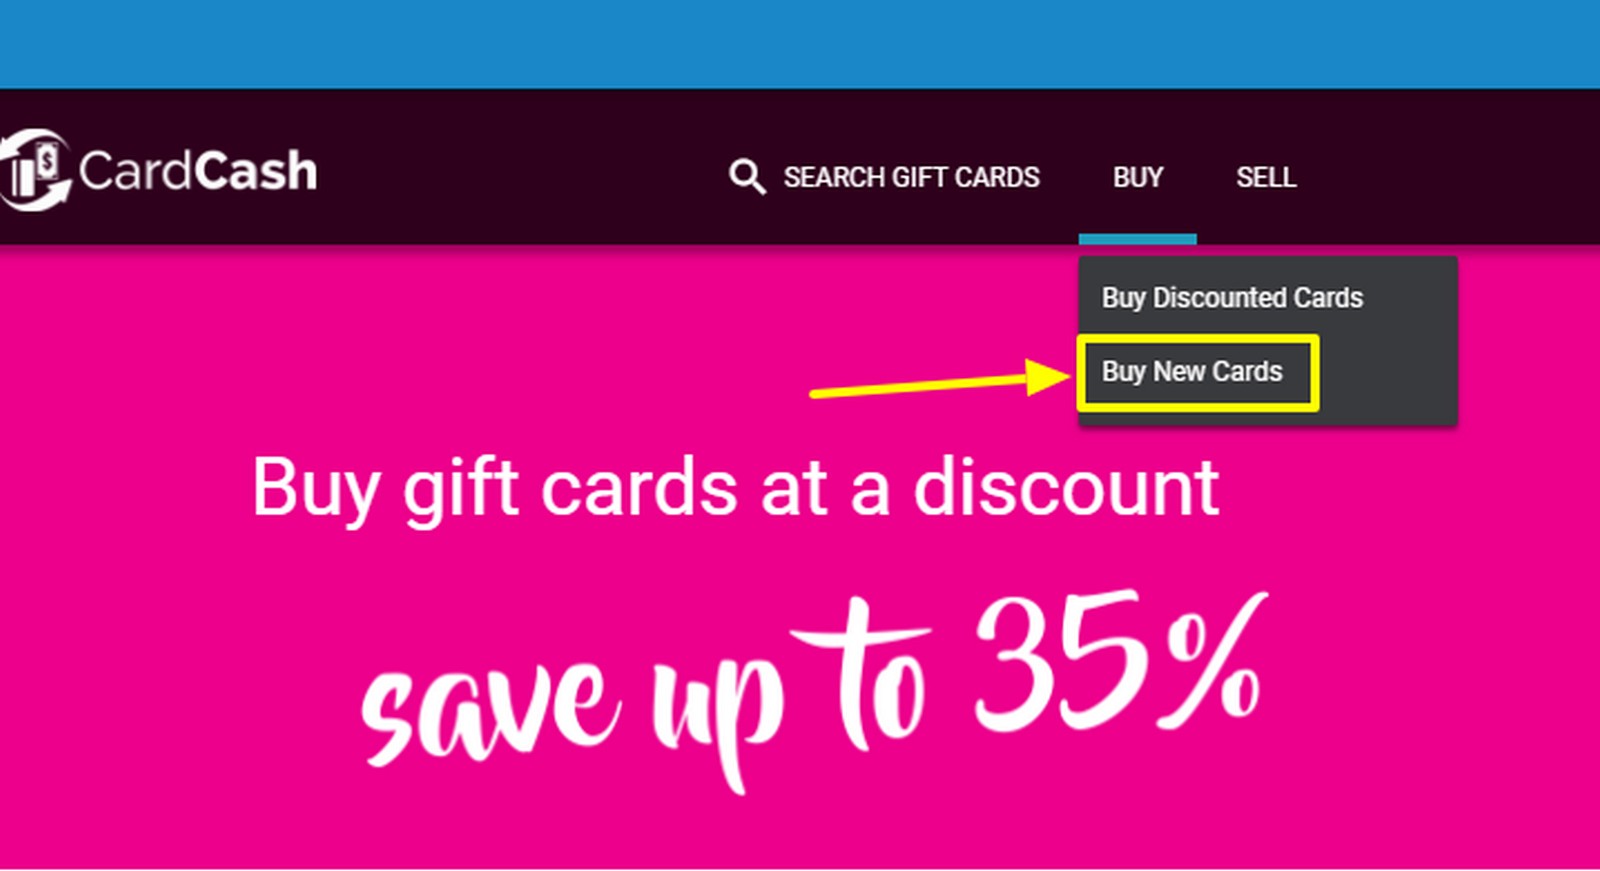 CardCash Now Sells New Gift Cards